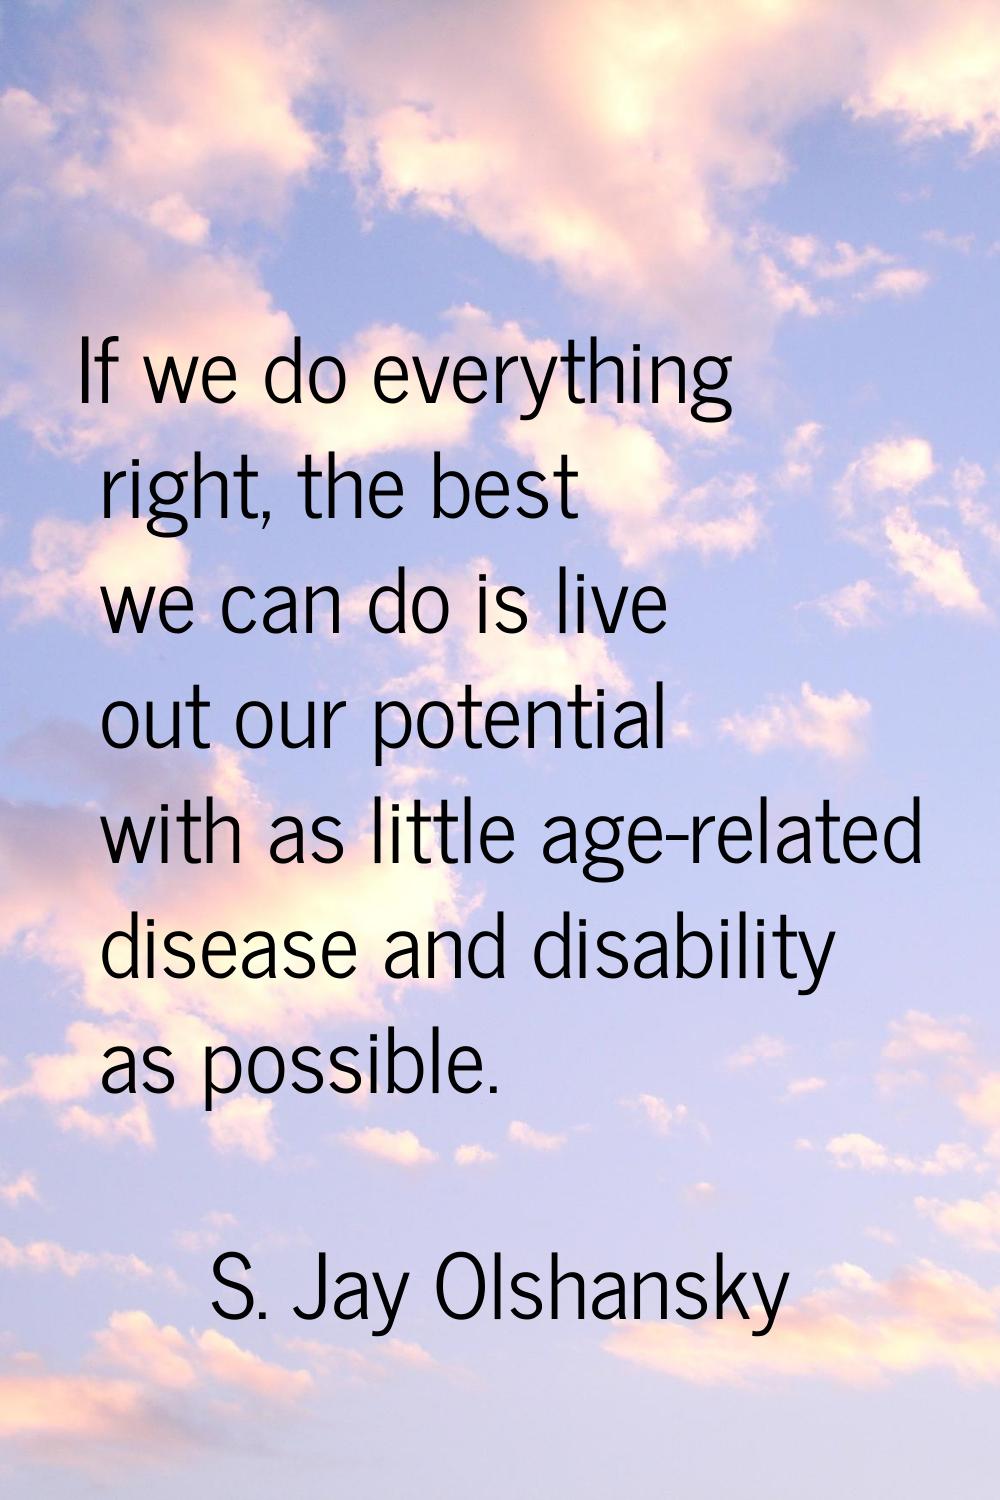 If we do everything right, the best we can do is live out our potential with as little age-related 